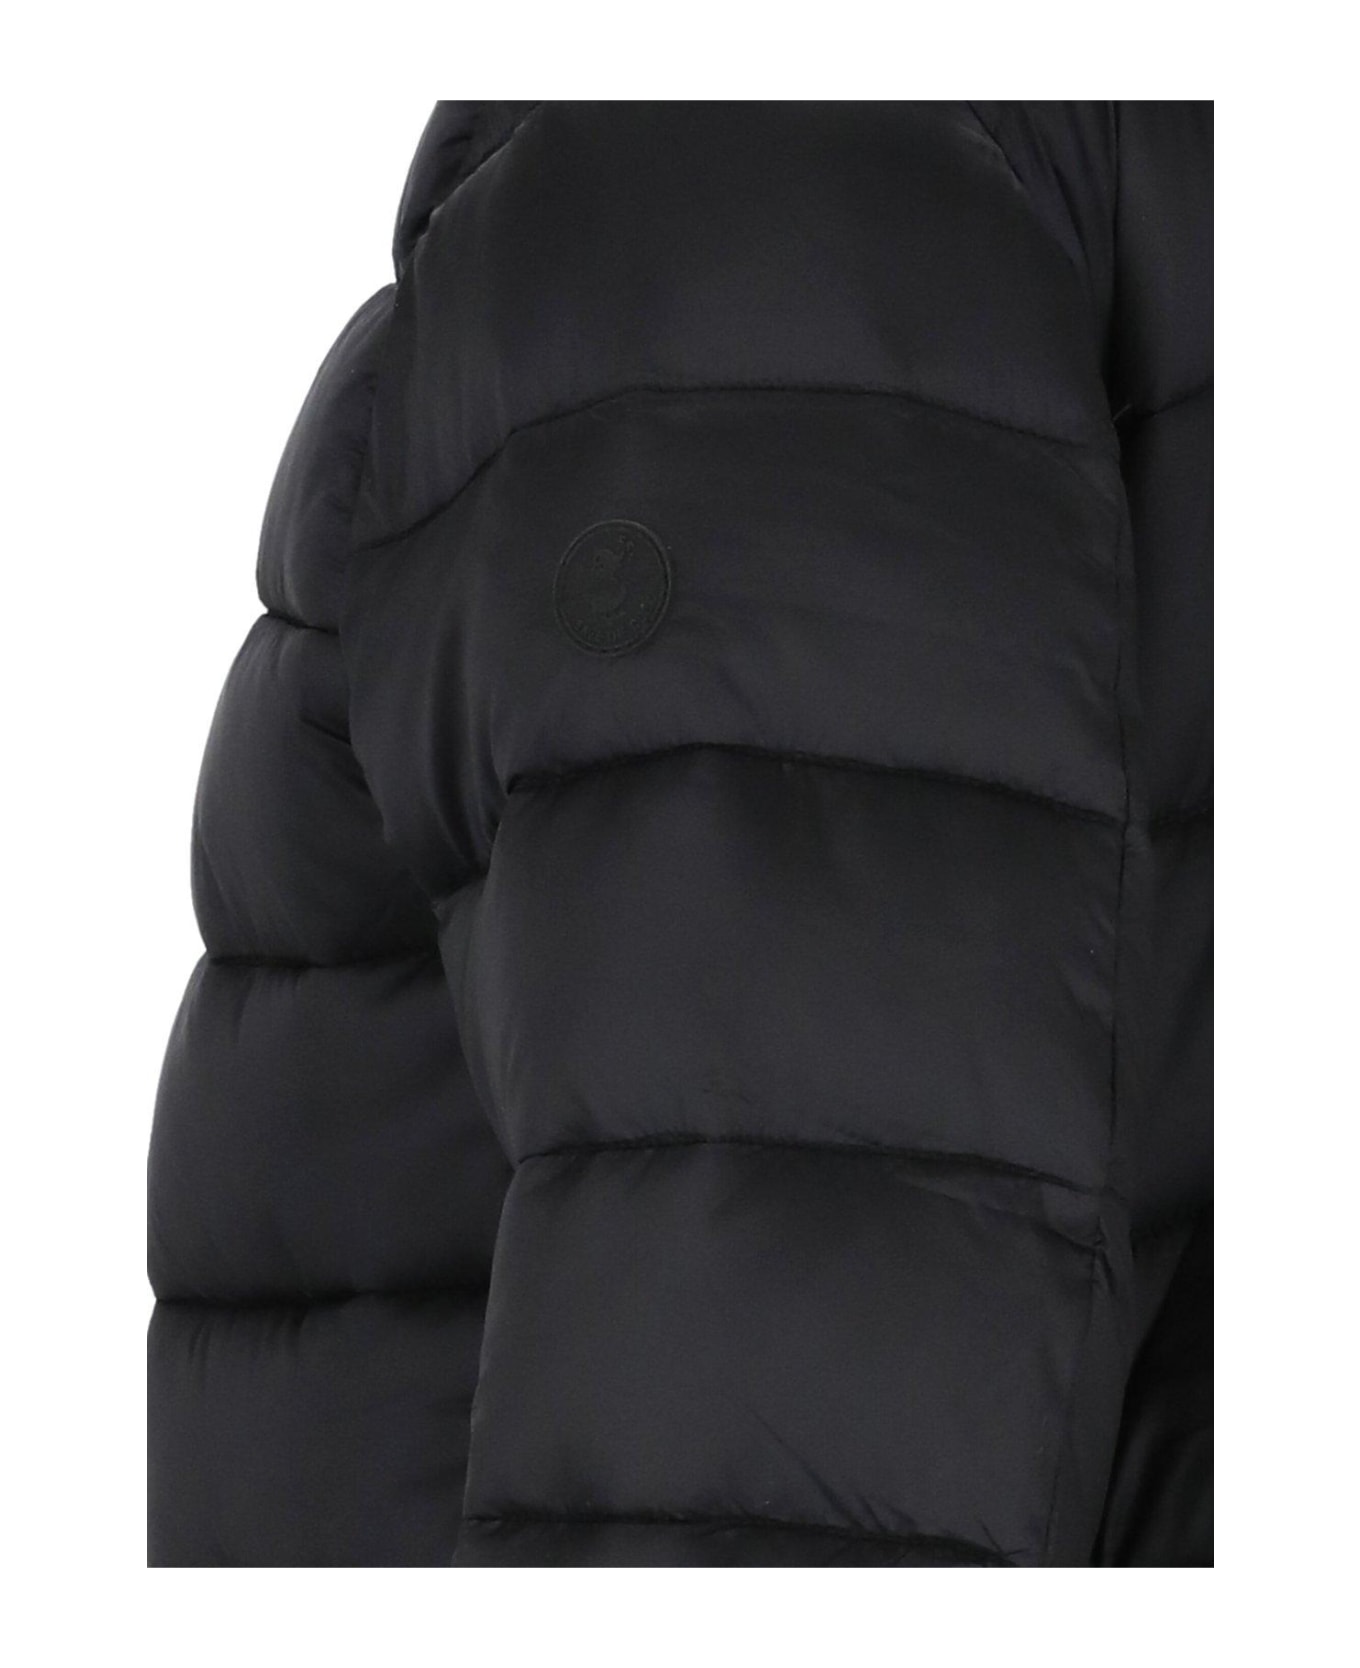 Save the Duck High Neck Hooded Coat - Black